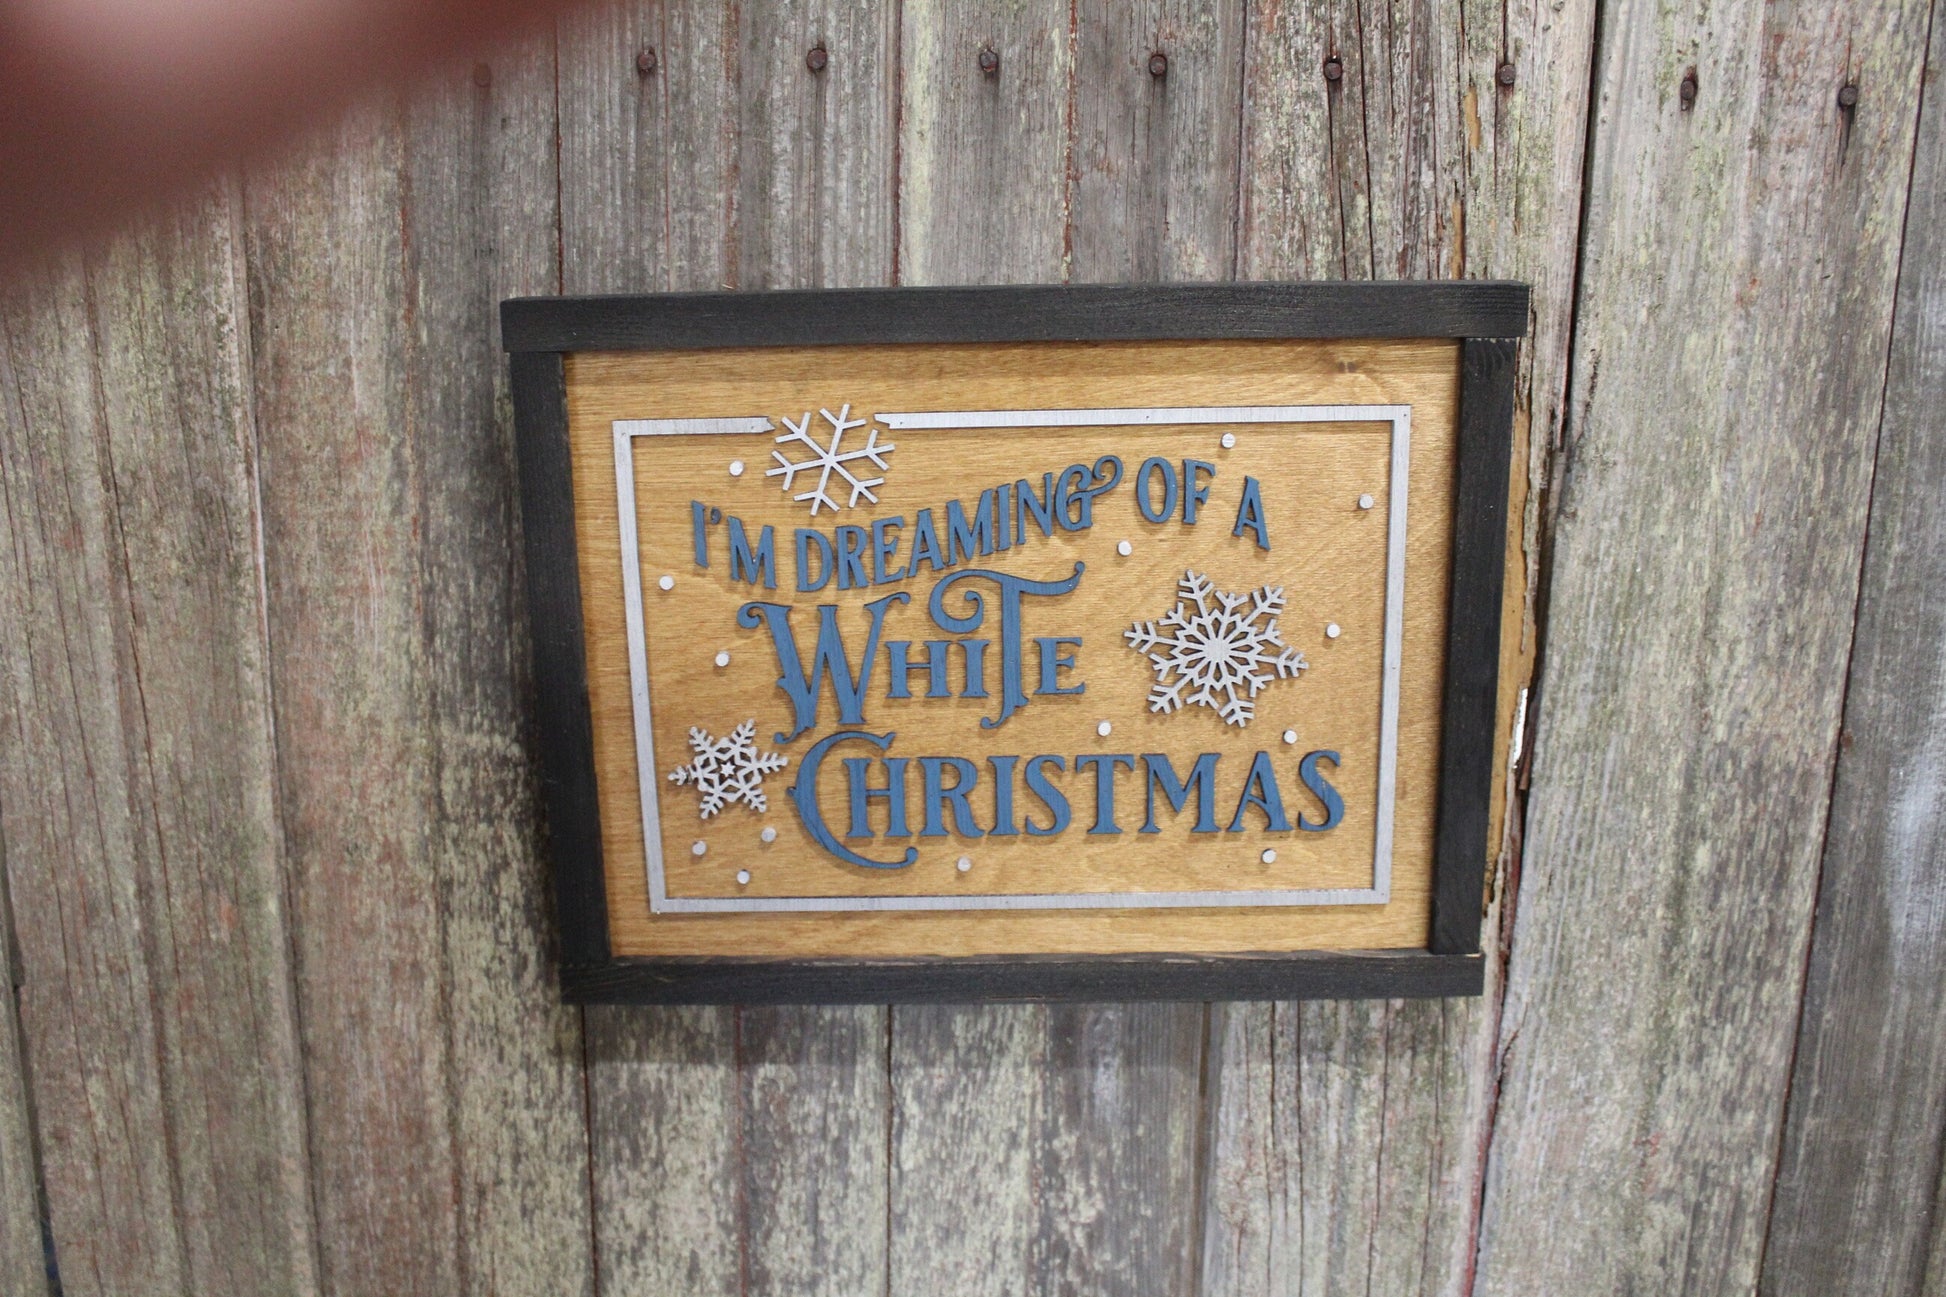 I'm Dreaming of a White Christmas Wood Sign Decoration Winter 3D Raised Text Country Farmhouse Cabin Decor Snowflake Merry Nostalgic Vintage